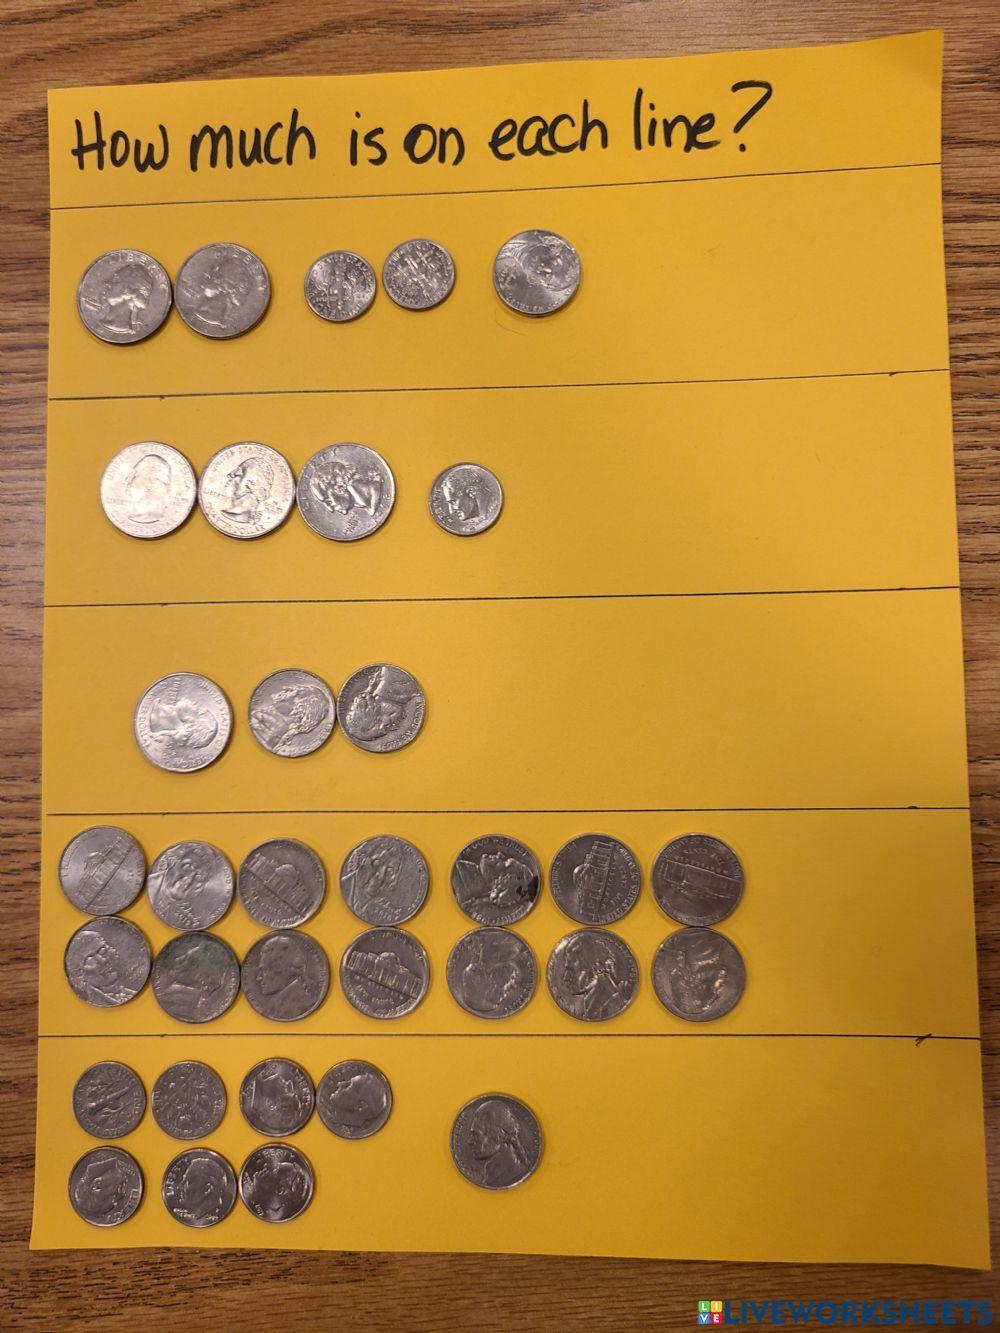 More coin counting